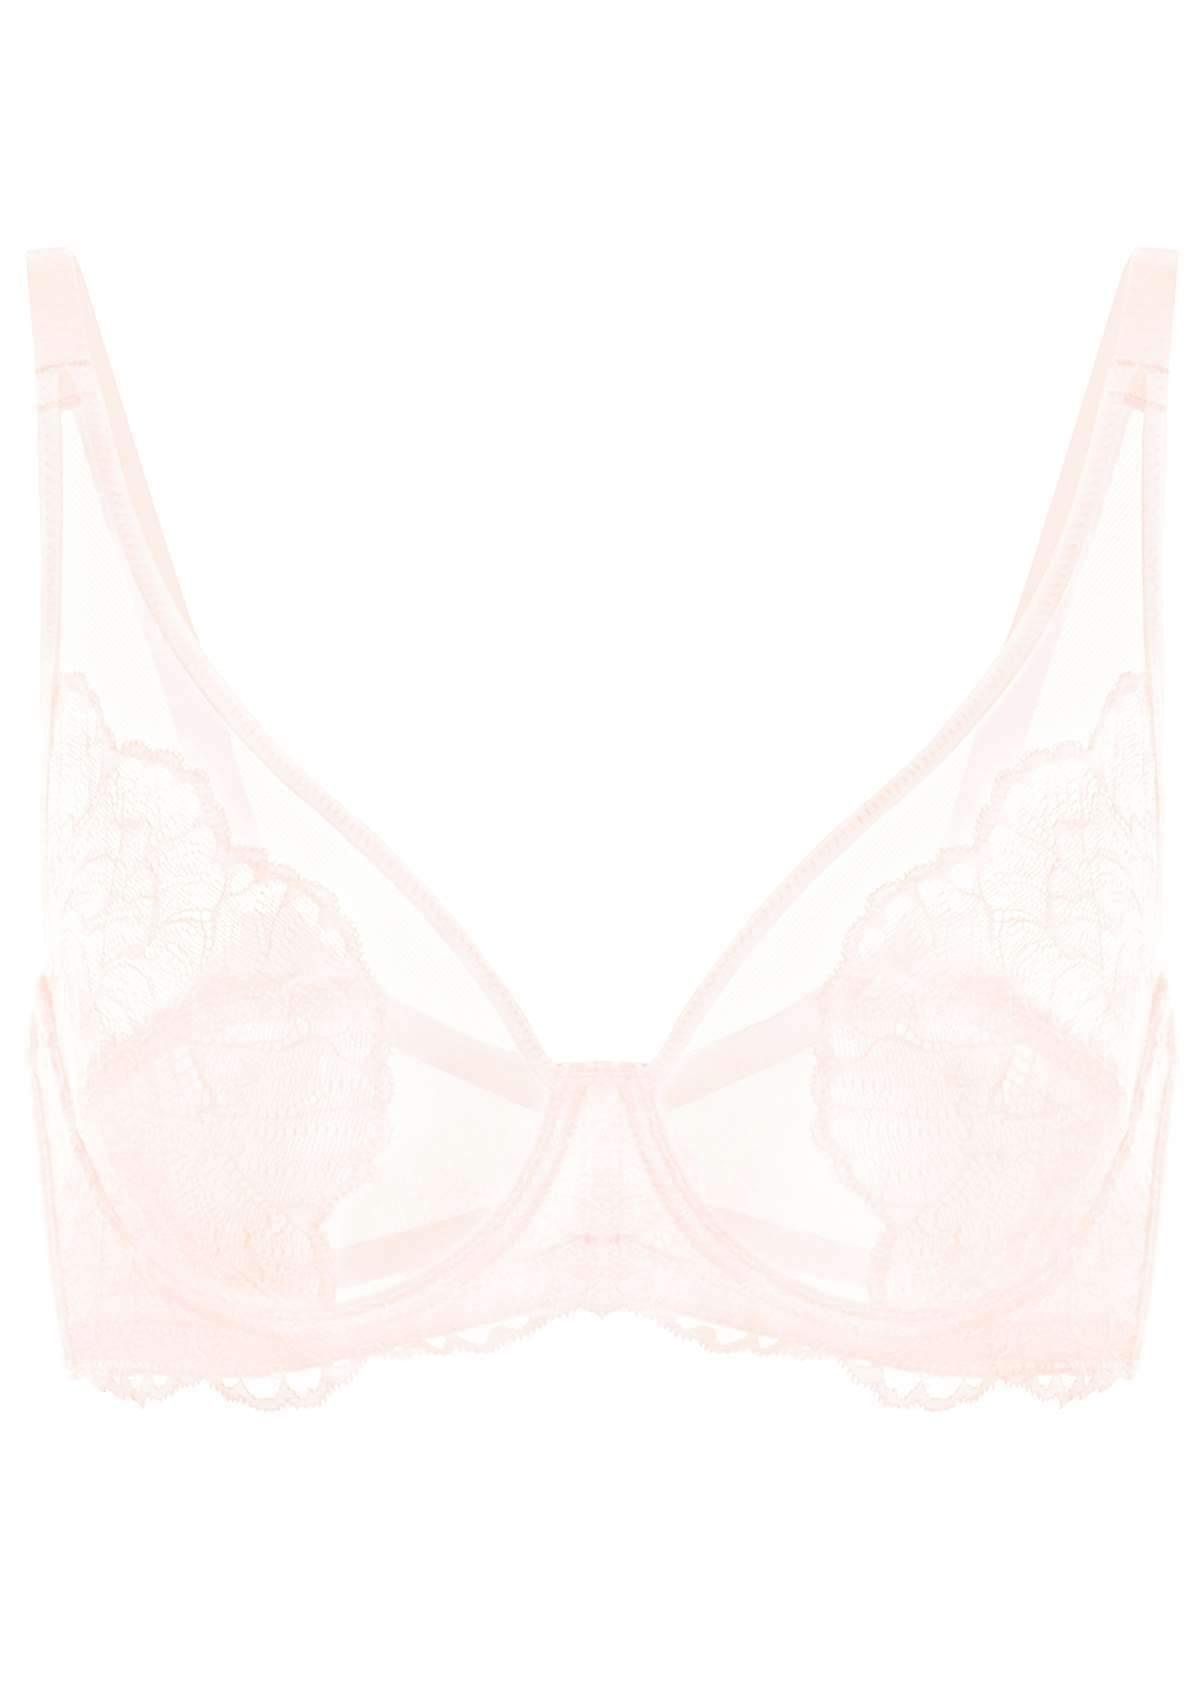 HSIA Blossom Sheer Lace Bra: Comfortable Underwire Bra For Big Busts - Dusty Peach / 44 / H